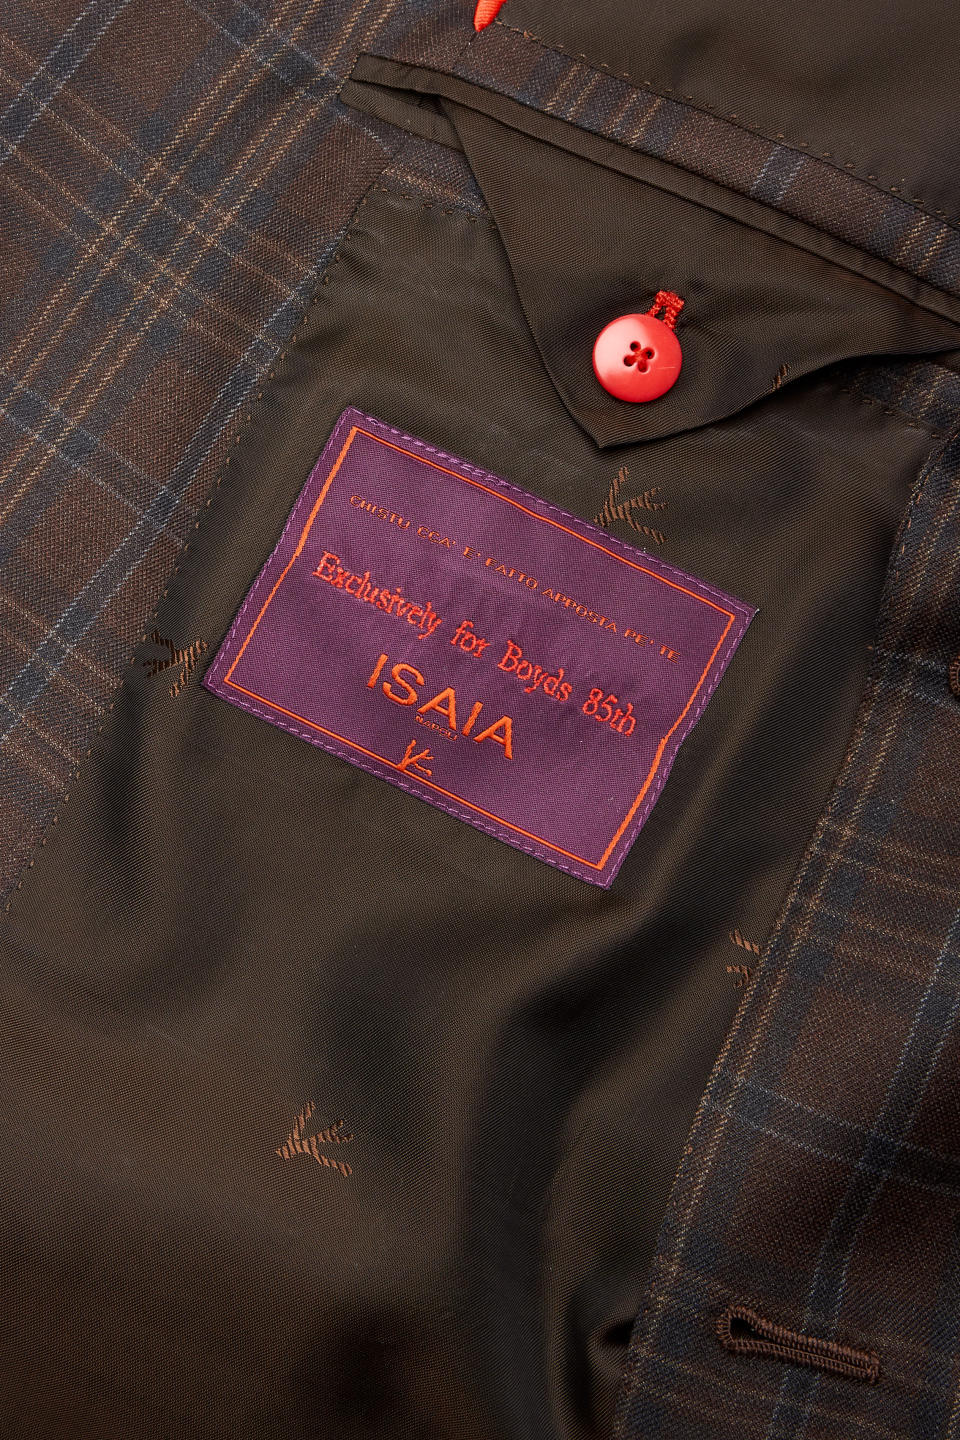 Isaia label for Boyds